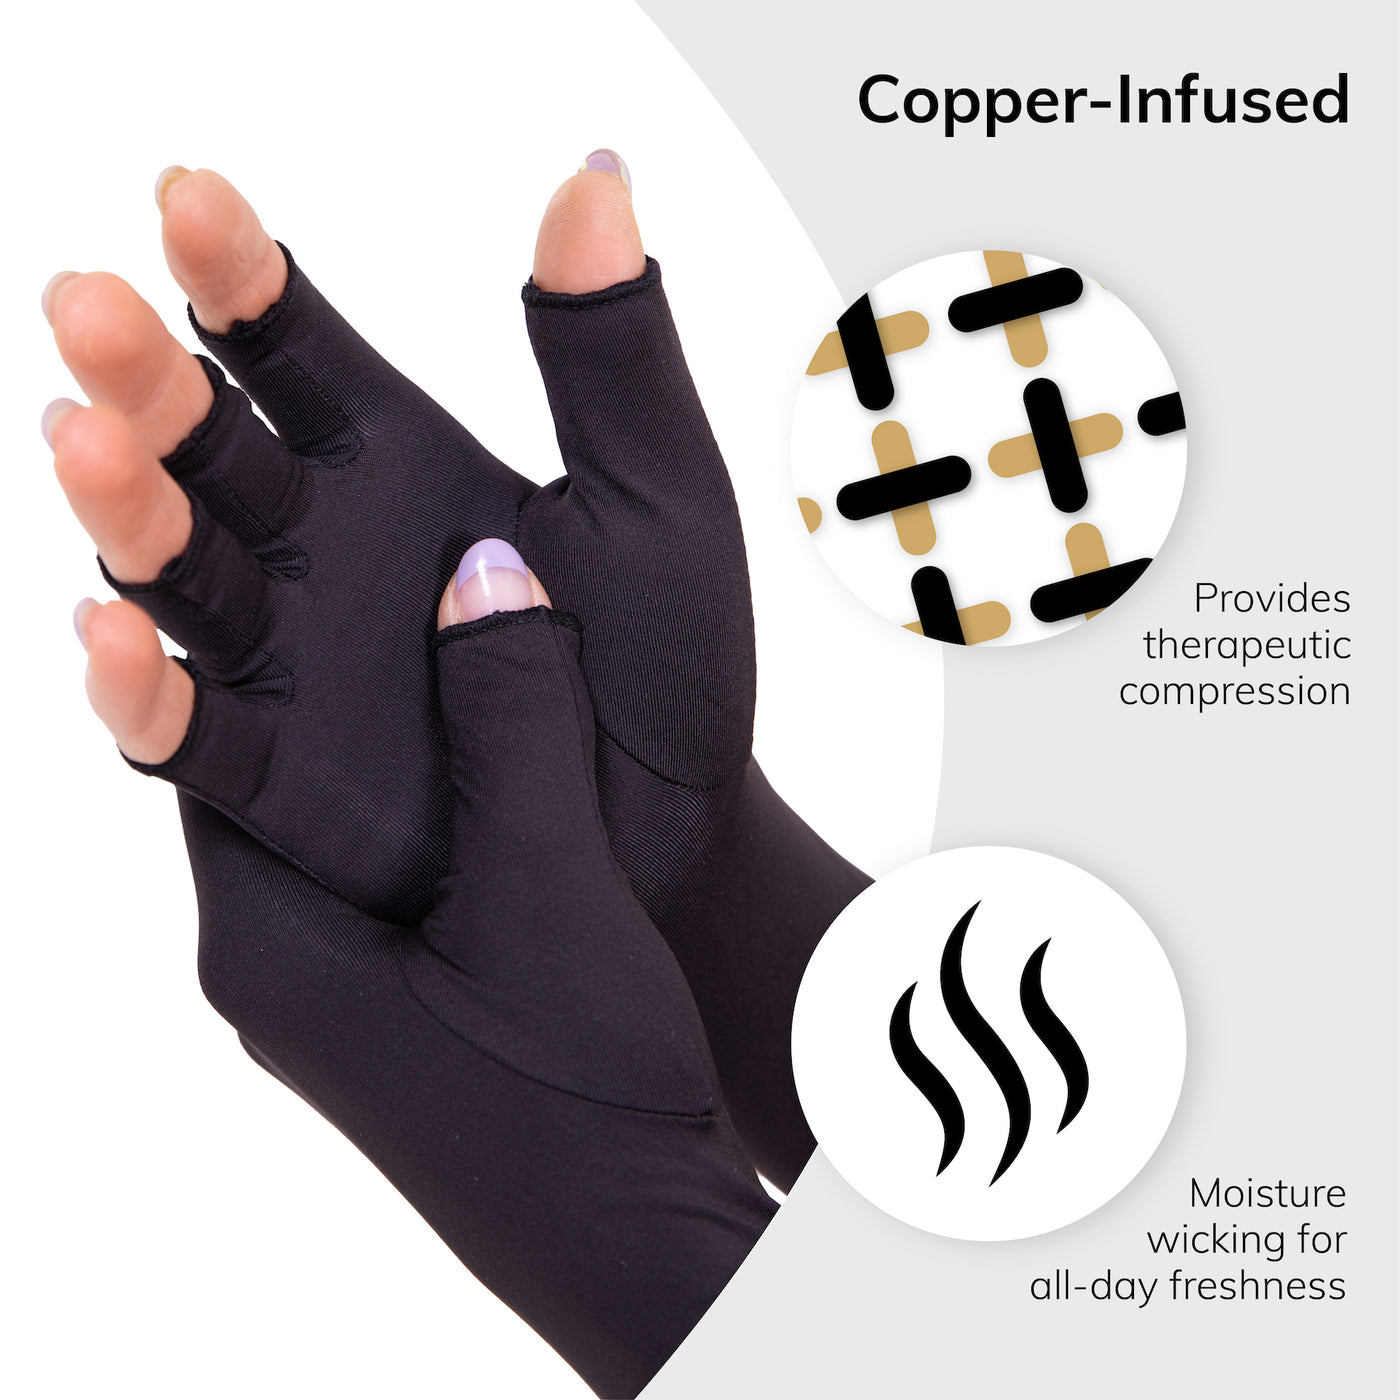 Our compression gloves for osteoarthritis are copper infused to provide therapeutic compression and wicks moisture for all-day freshness